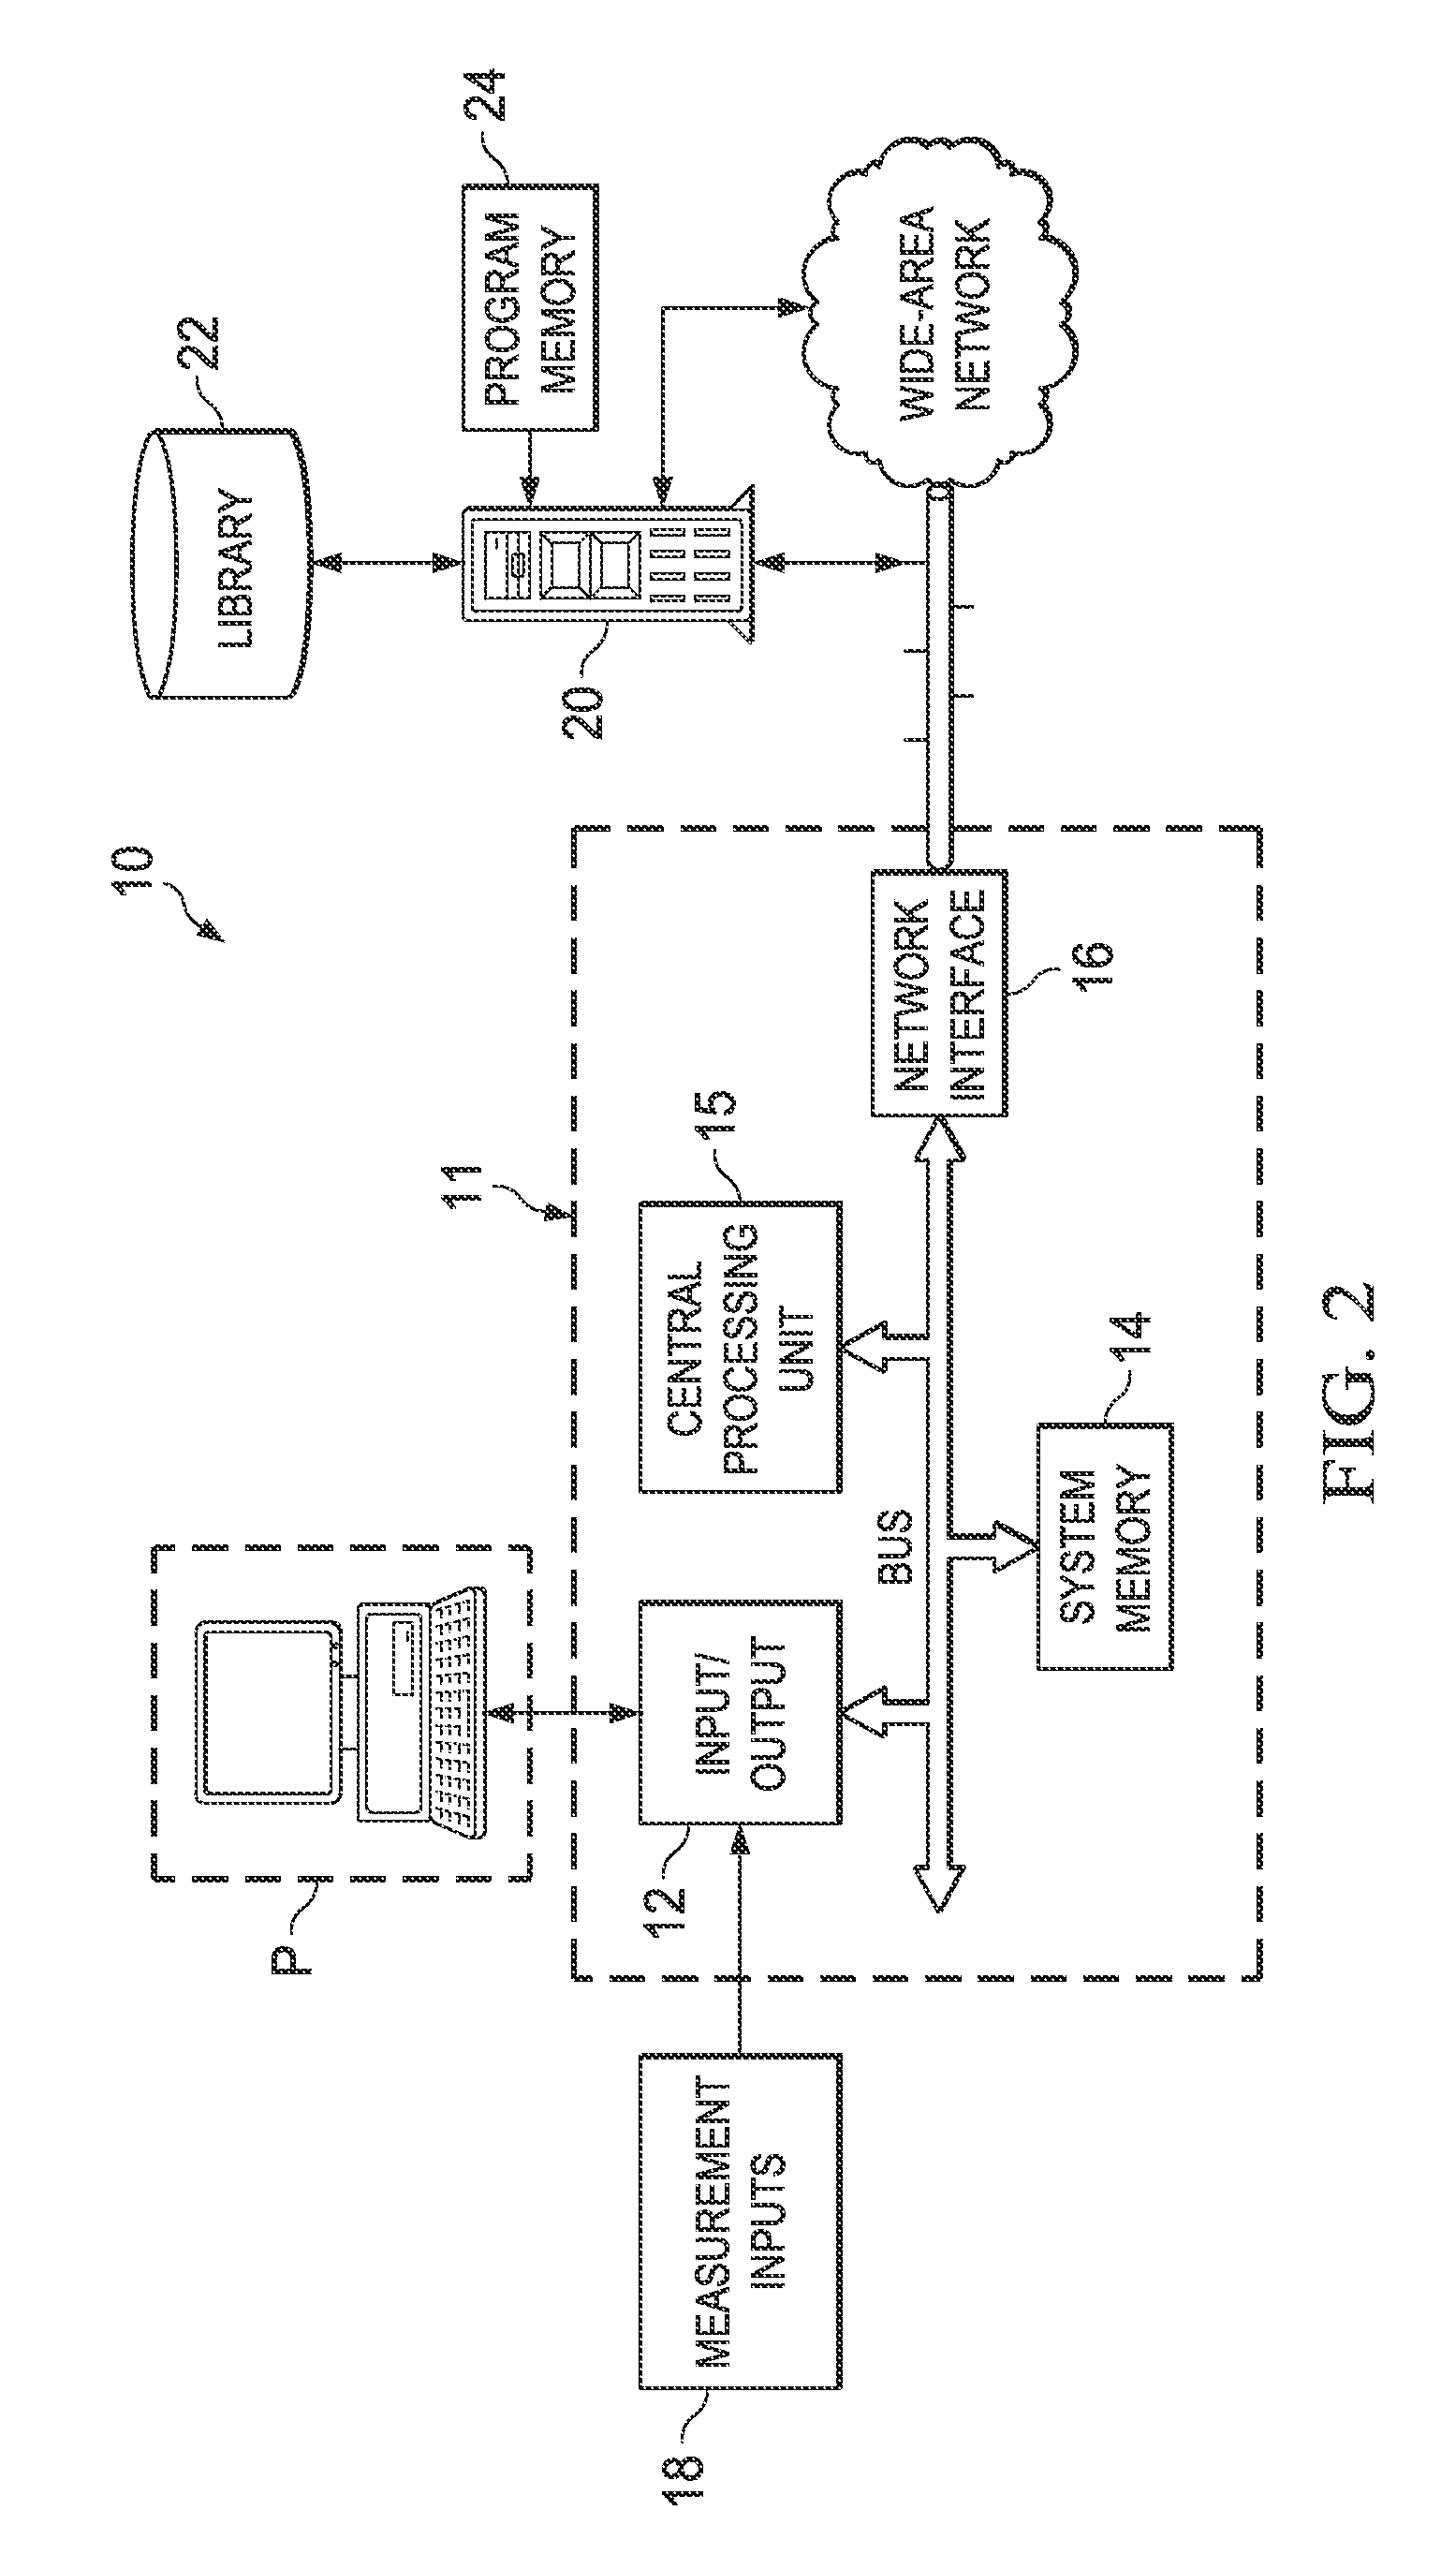 Method and system for predicting corrosion rates using mechanistic models